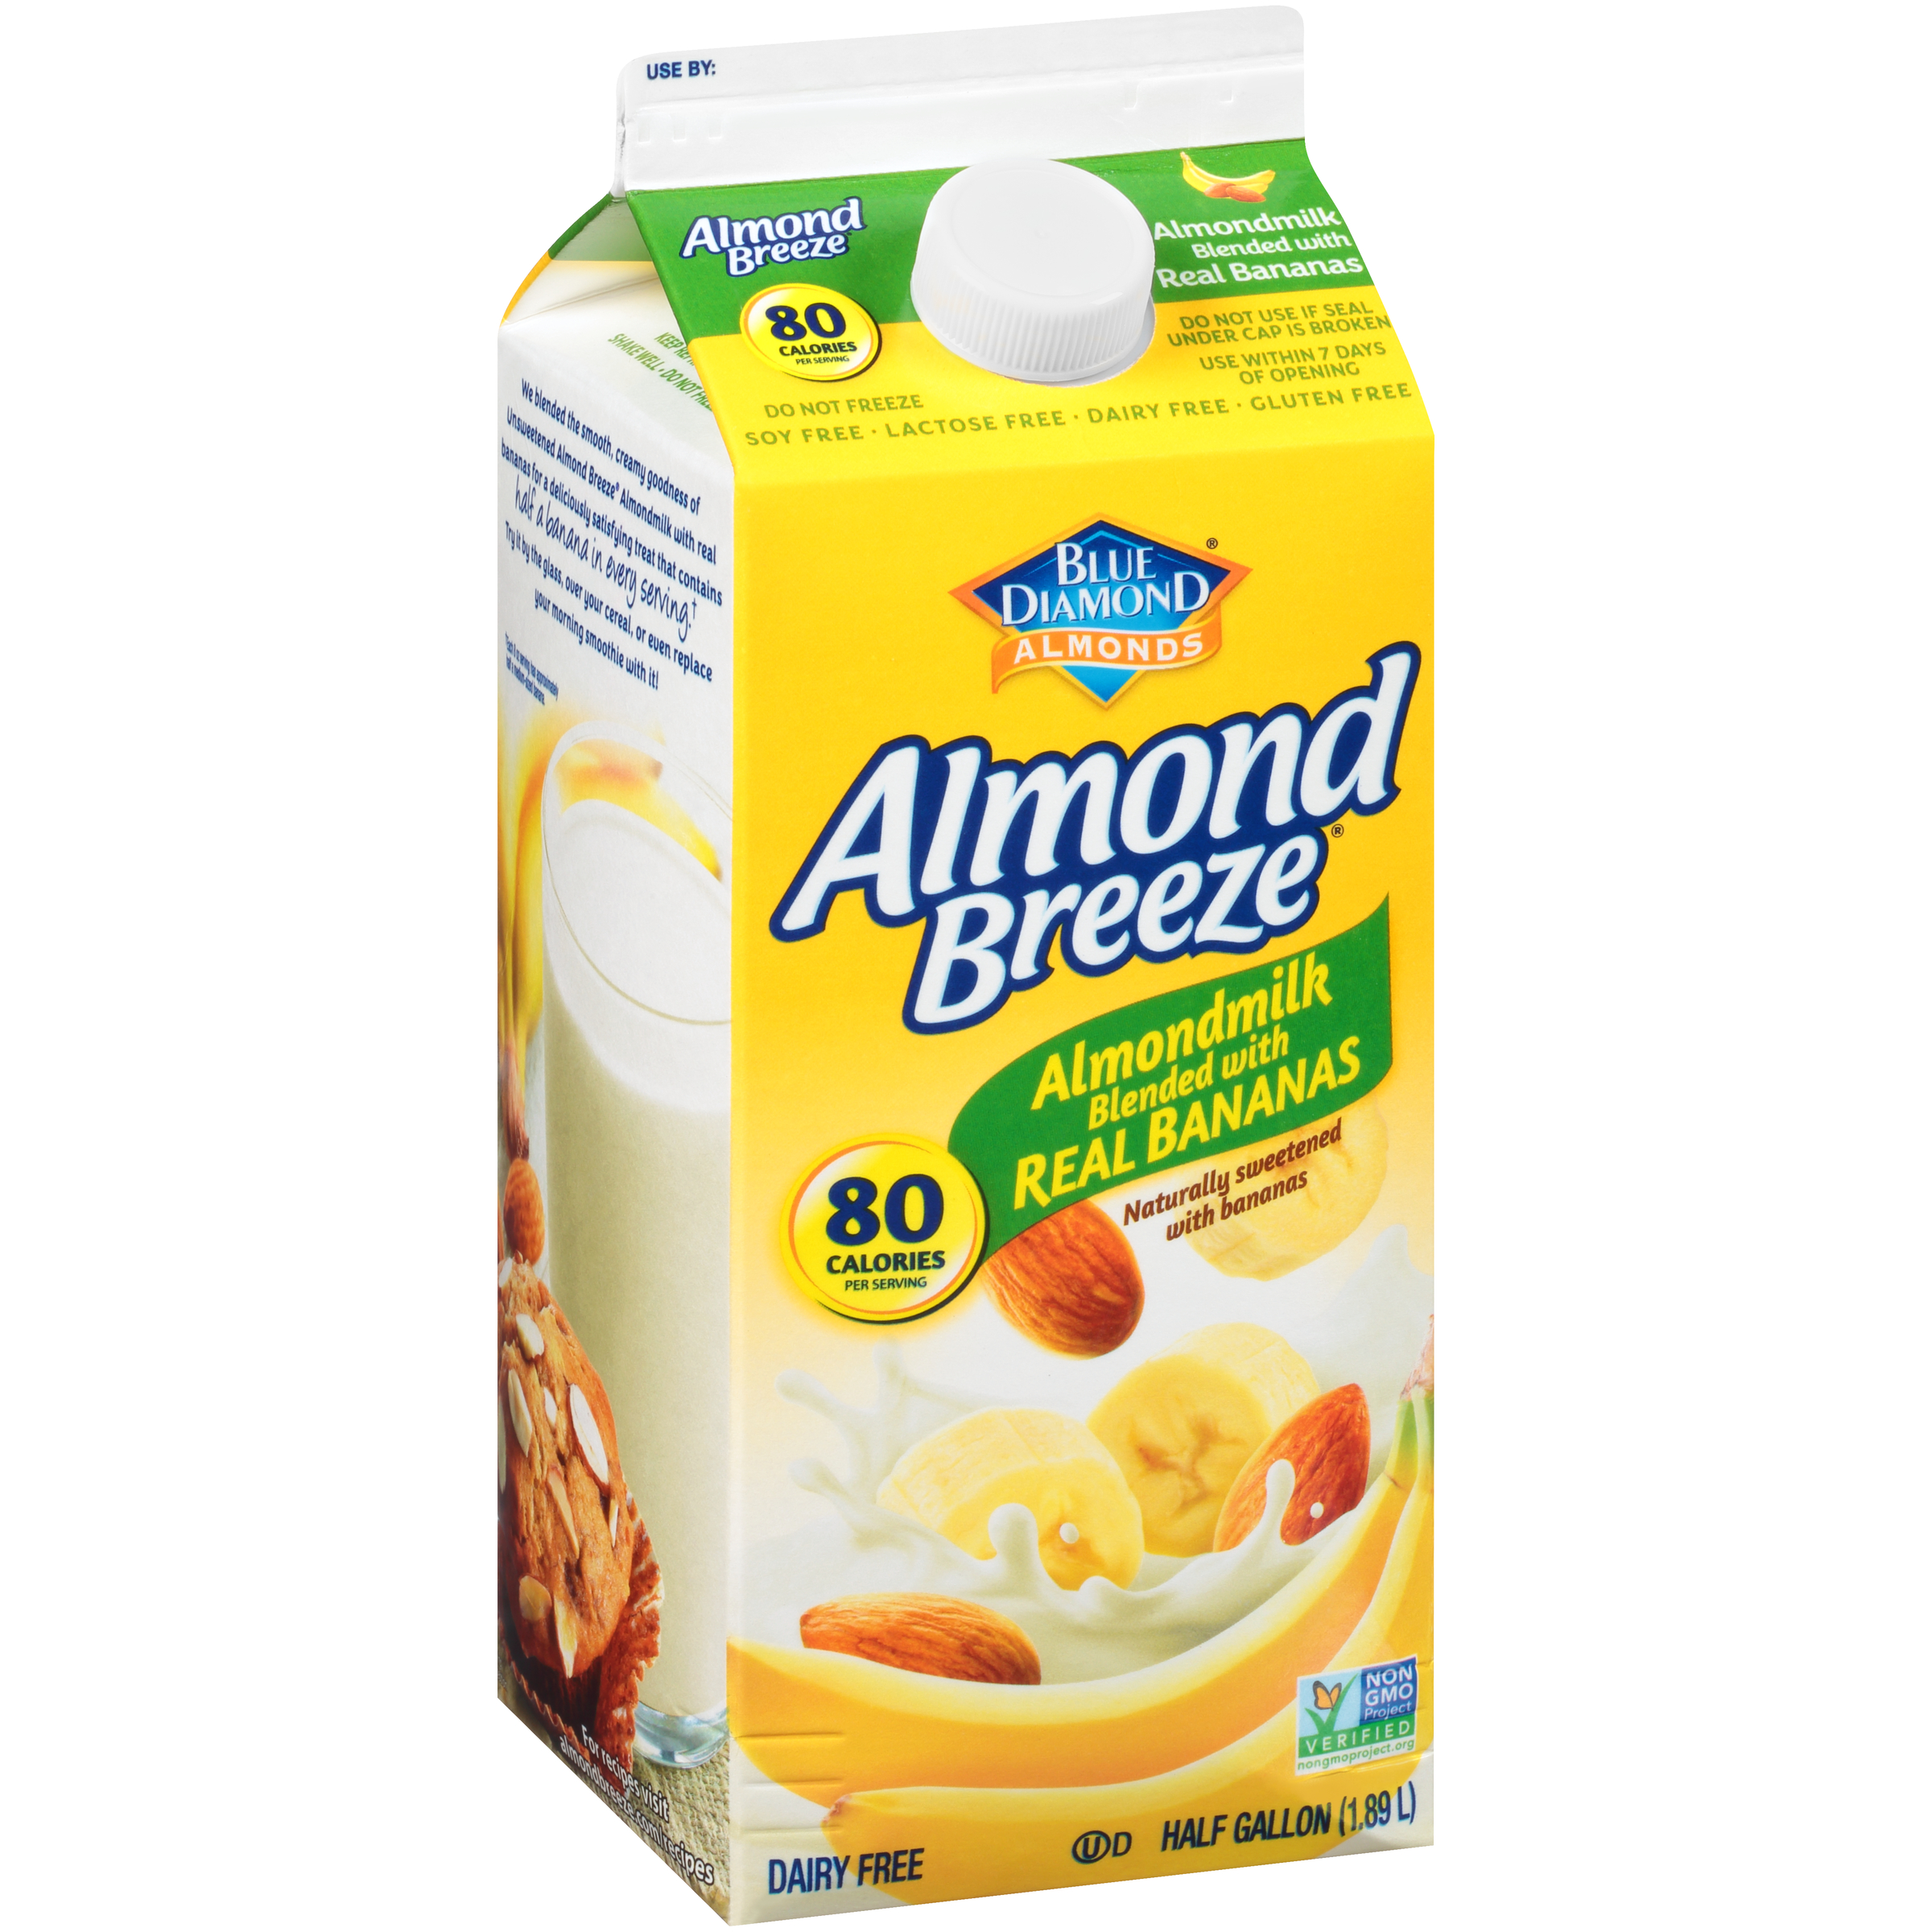 Almond Breeze Almondmilk Blended with Real Bananas, 64 oz - image 1 of 2